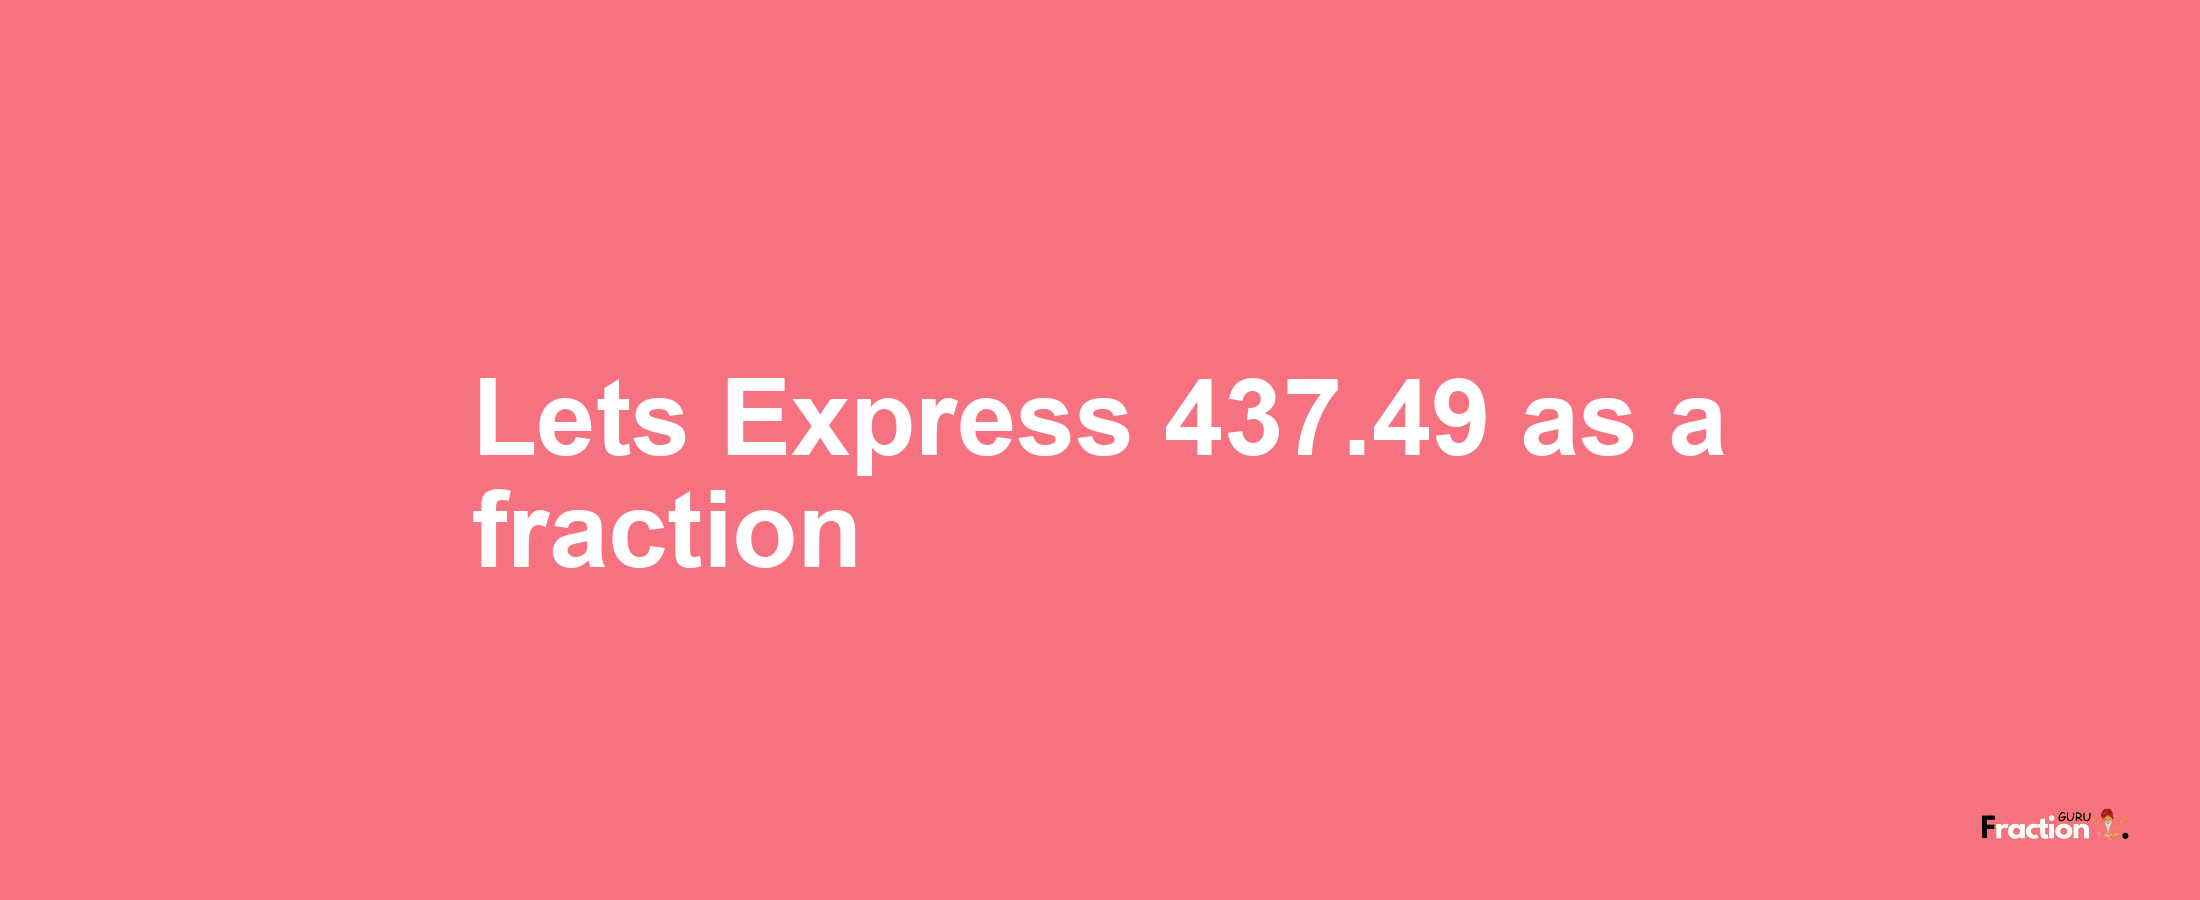 Lets Express 437.49 as afraction